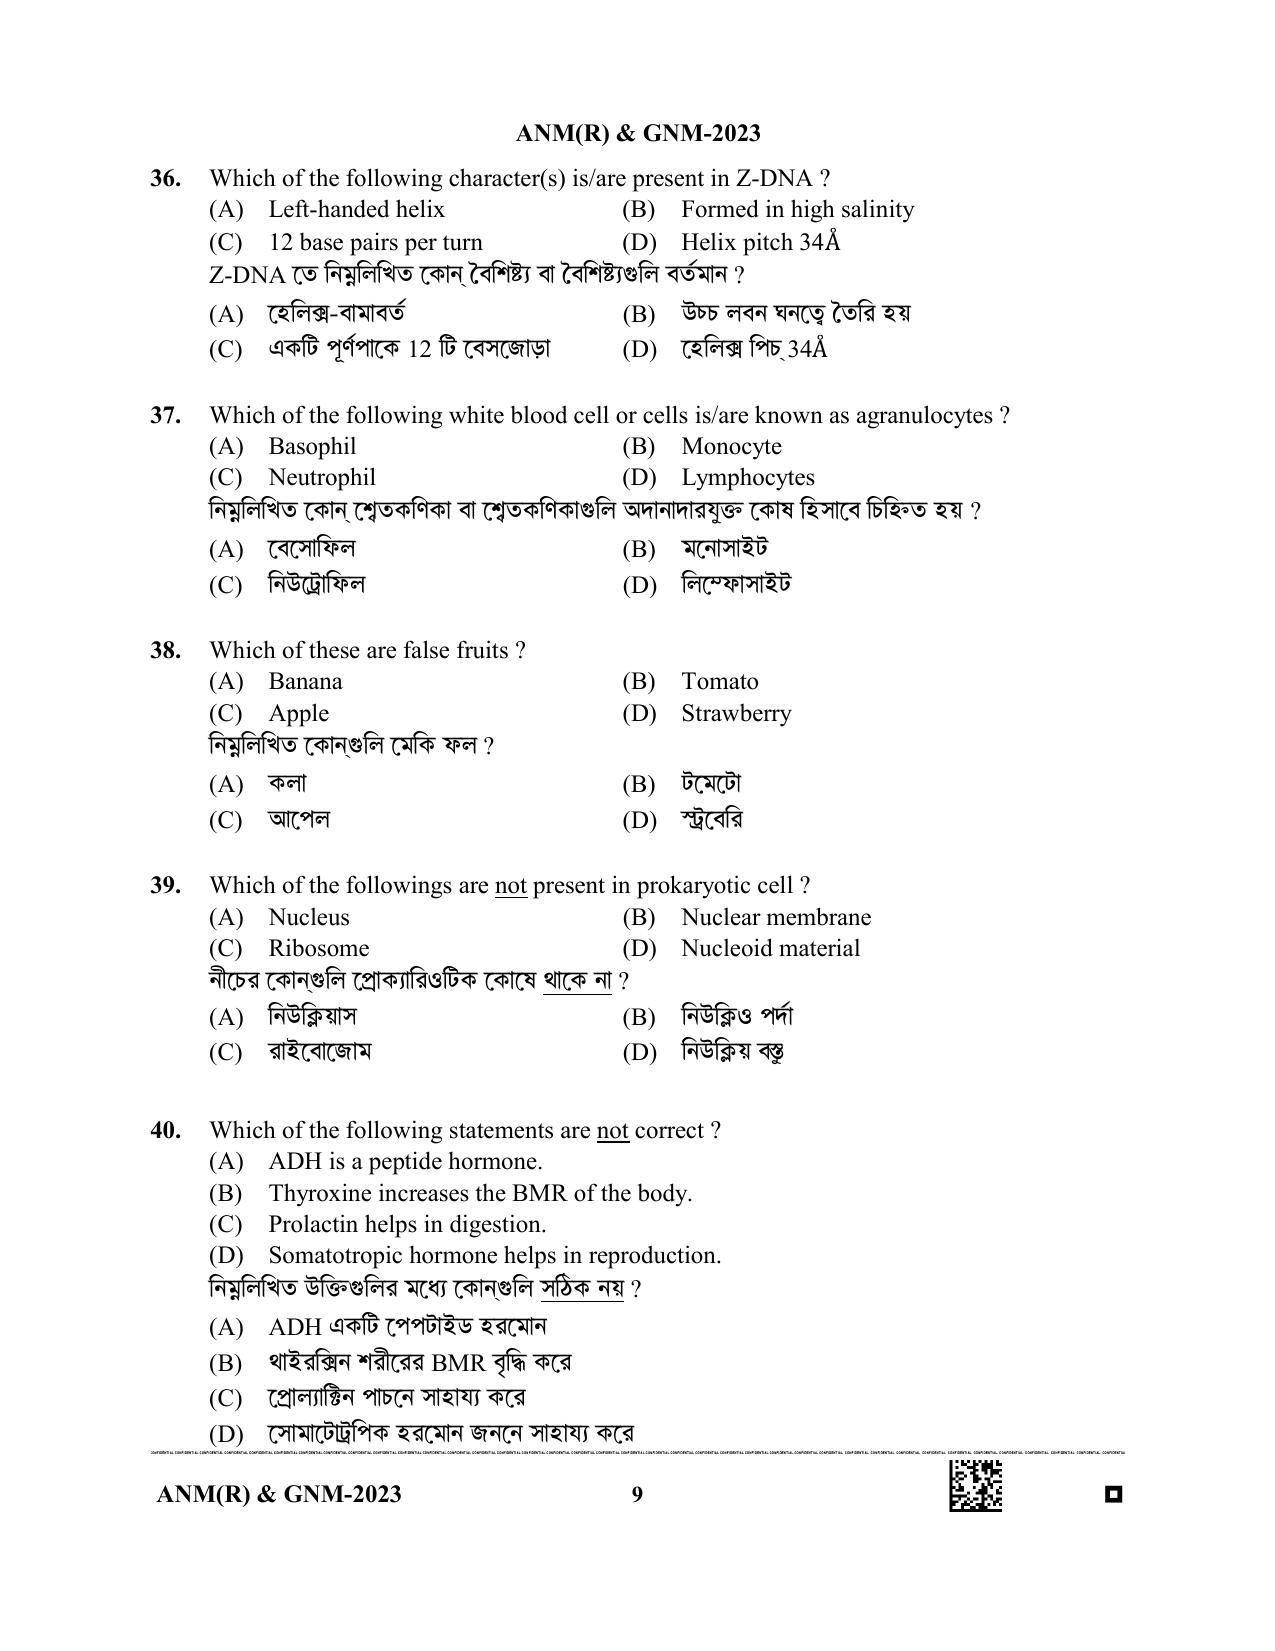 WB ANM GNM 2023 Question Paper - Page 9